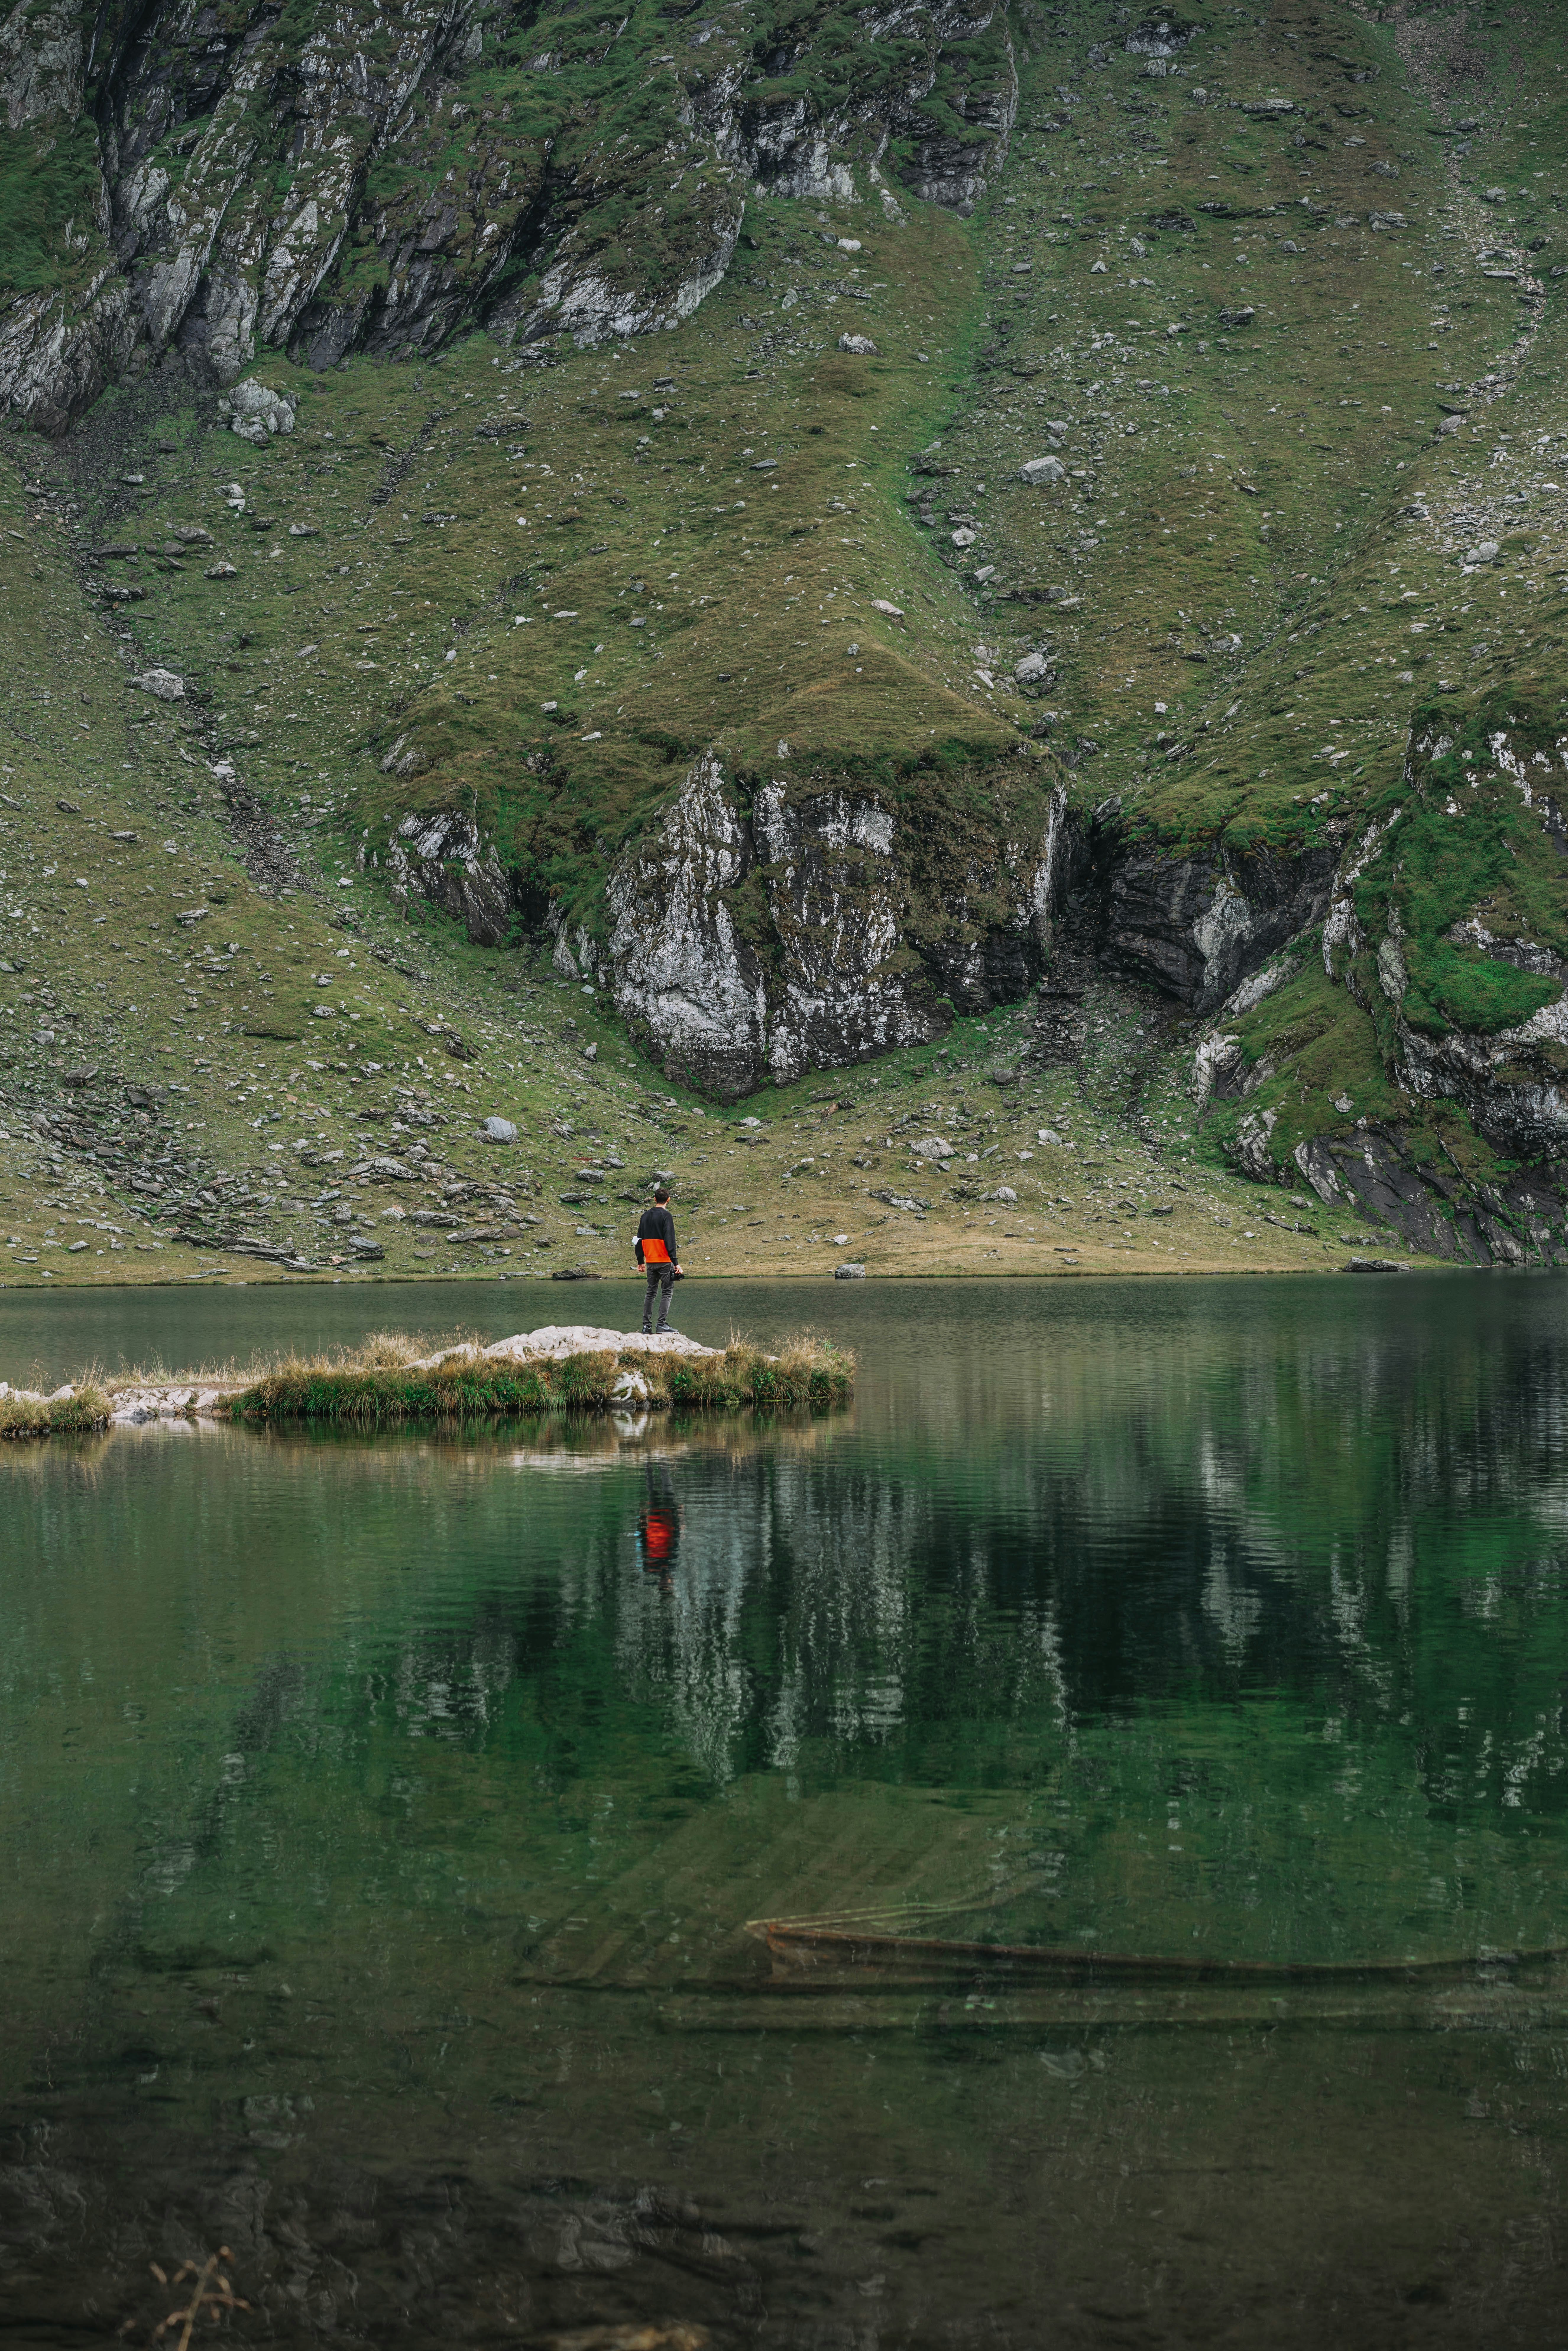 person in red shirt standing near lake during daytime